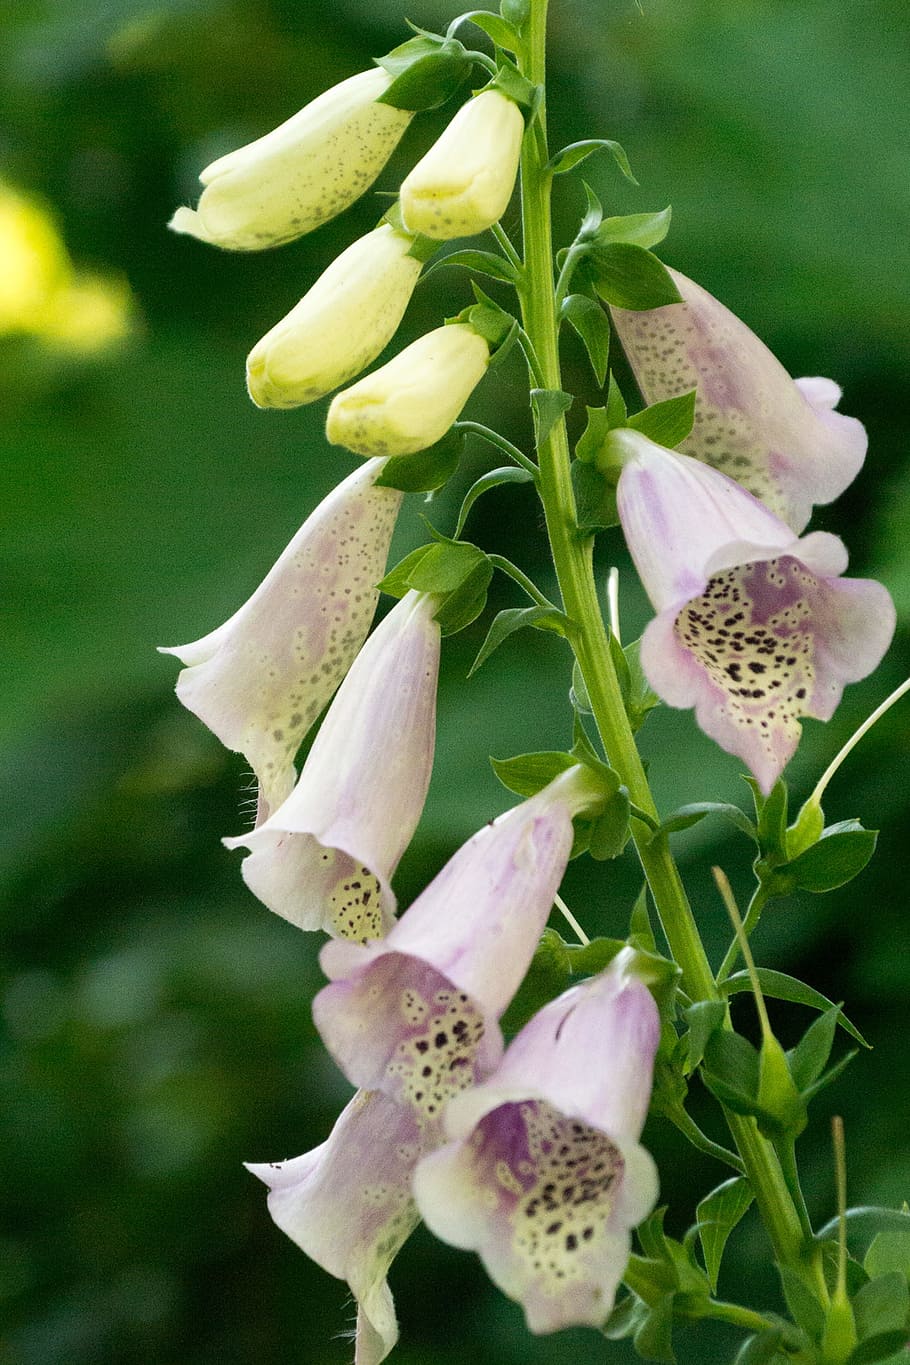 Digitalis purpurea blossoms. This pink foxglove has bell shaped flowers speckled with magenta and white patterns inside of the flowers.